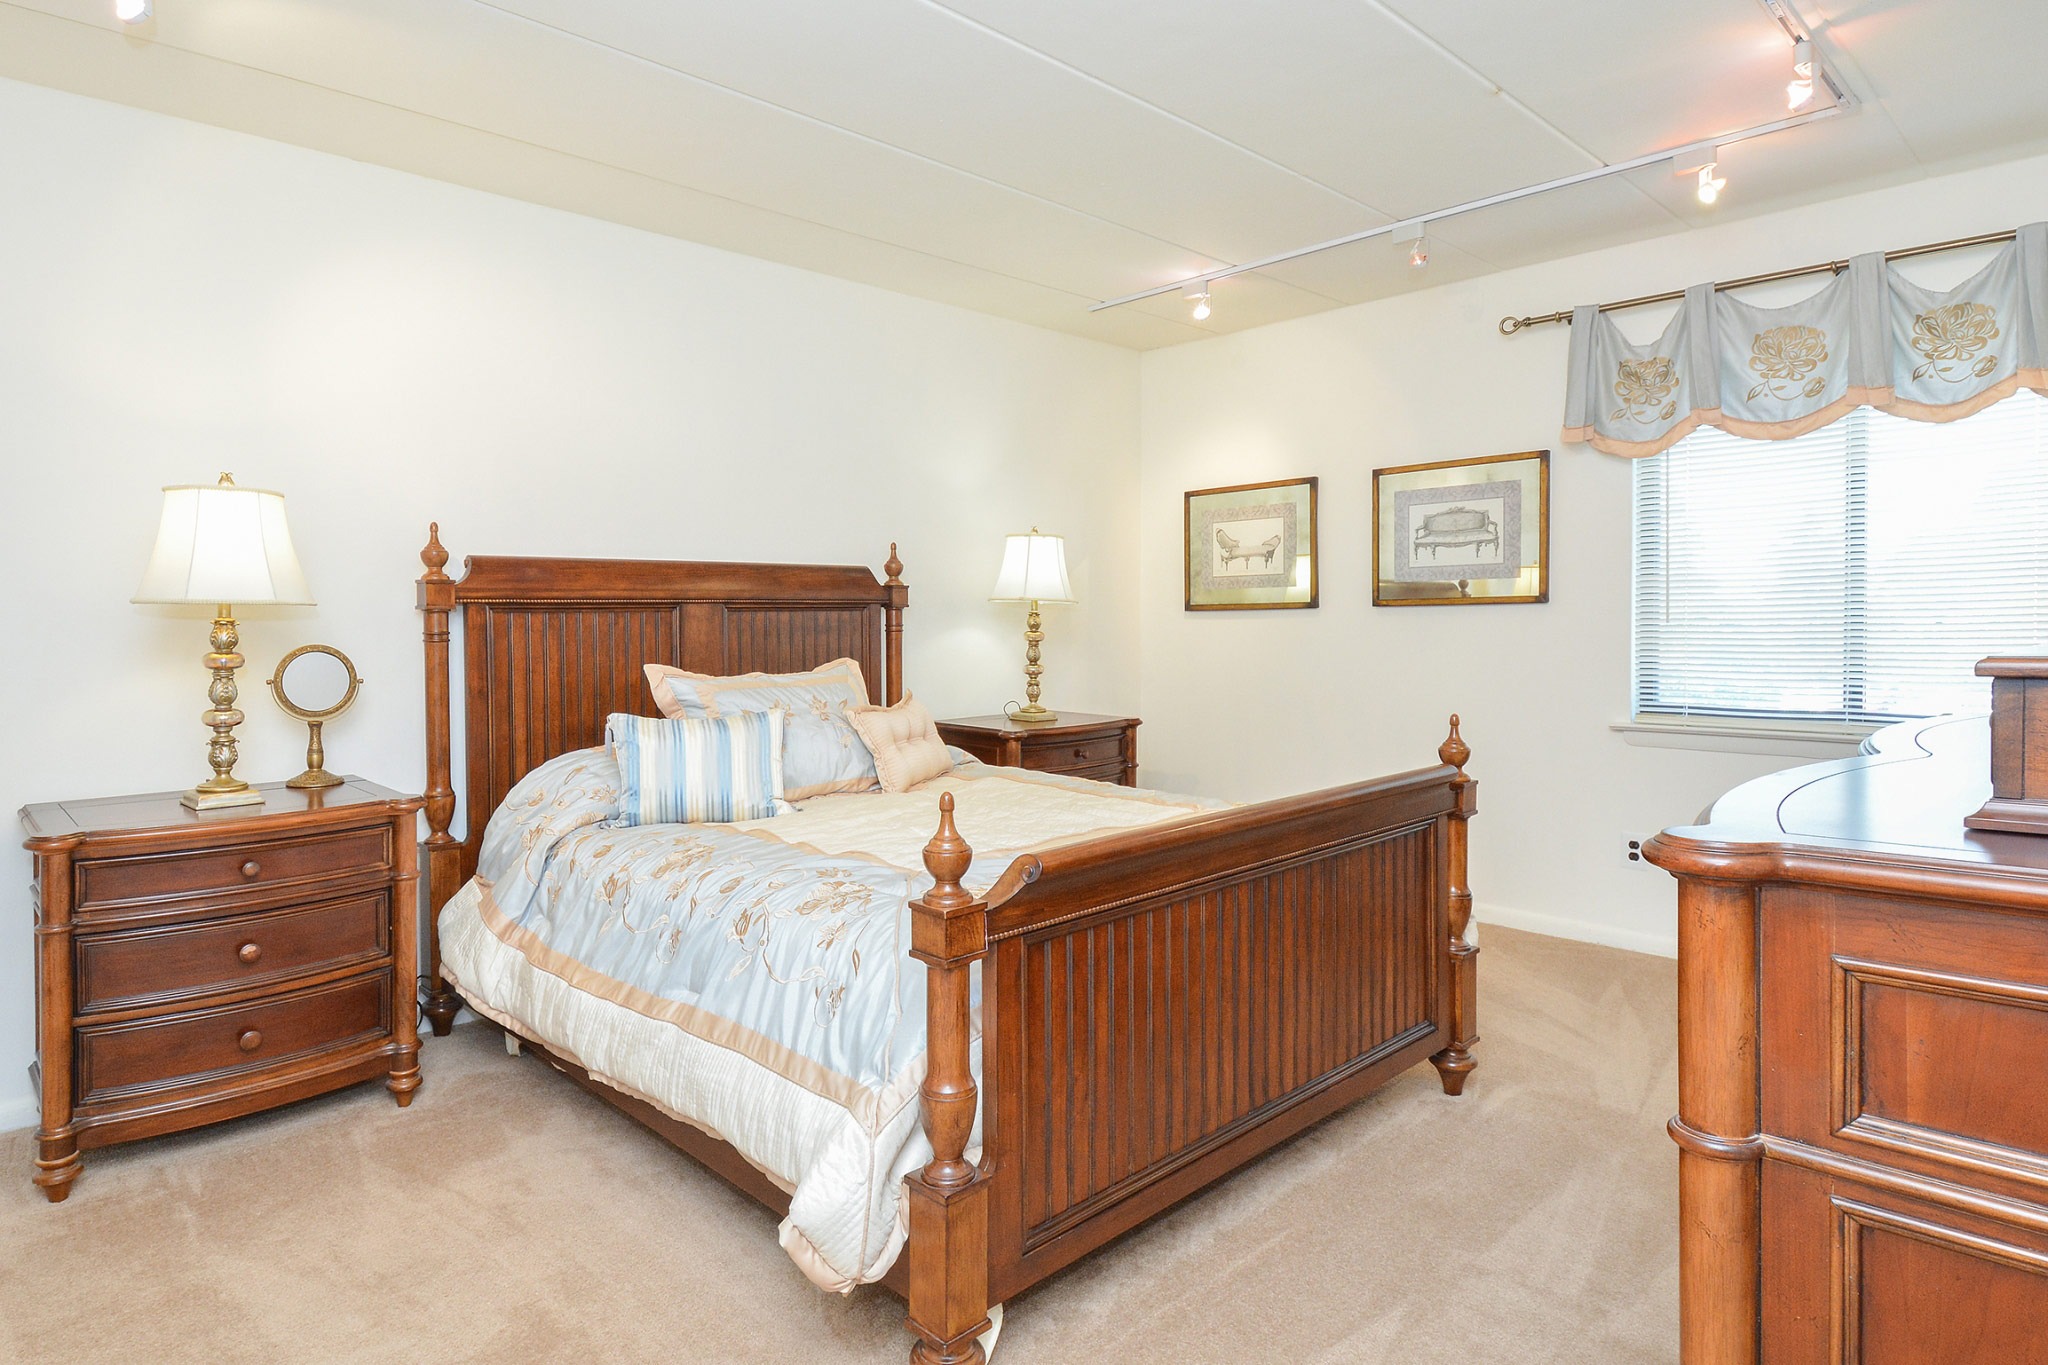 Bedroom area of an apartment is furnished with a queen size bed, a high ceiling, and two nightstands